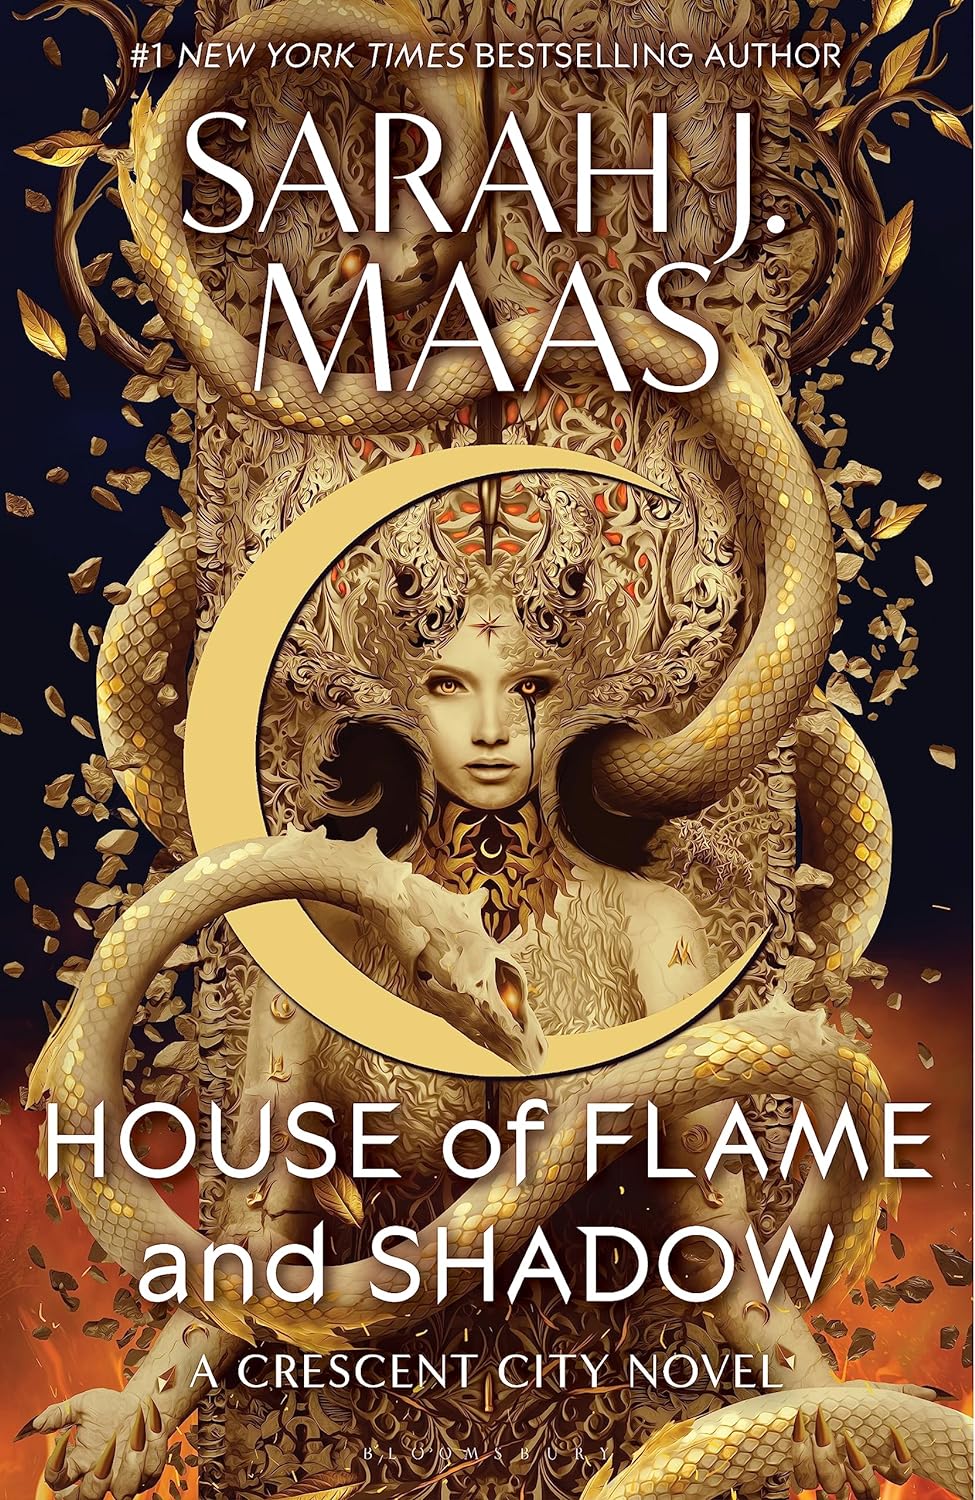 House of Flame and Shadow by Sarah J. Maas (The Crescent City Series, Book 3) (1/30/24)